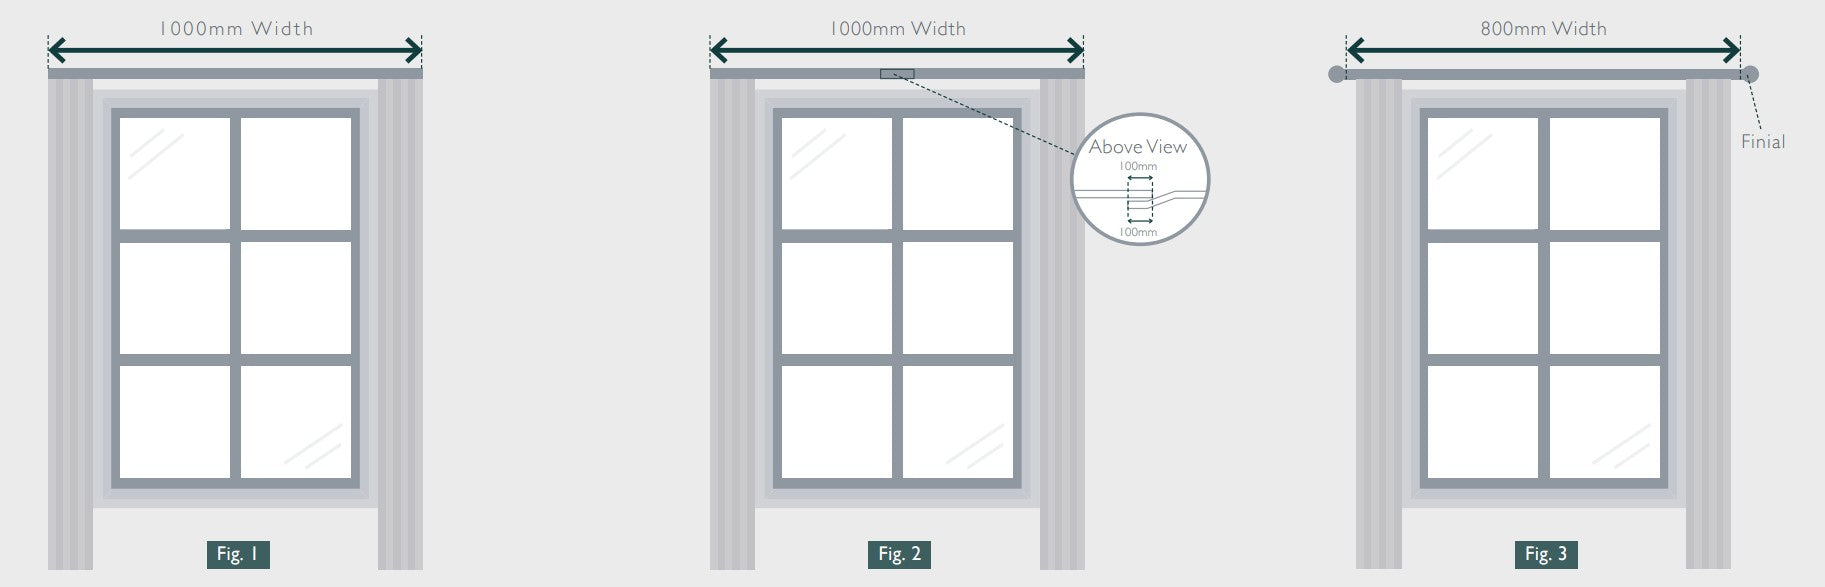 How To Effectively Measure Curtains For Your Windows